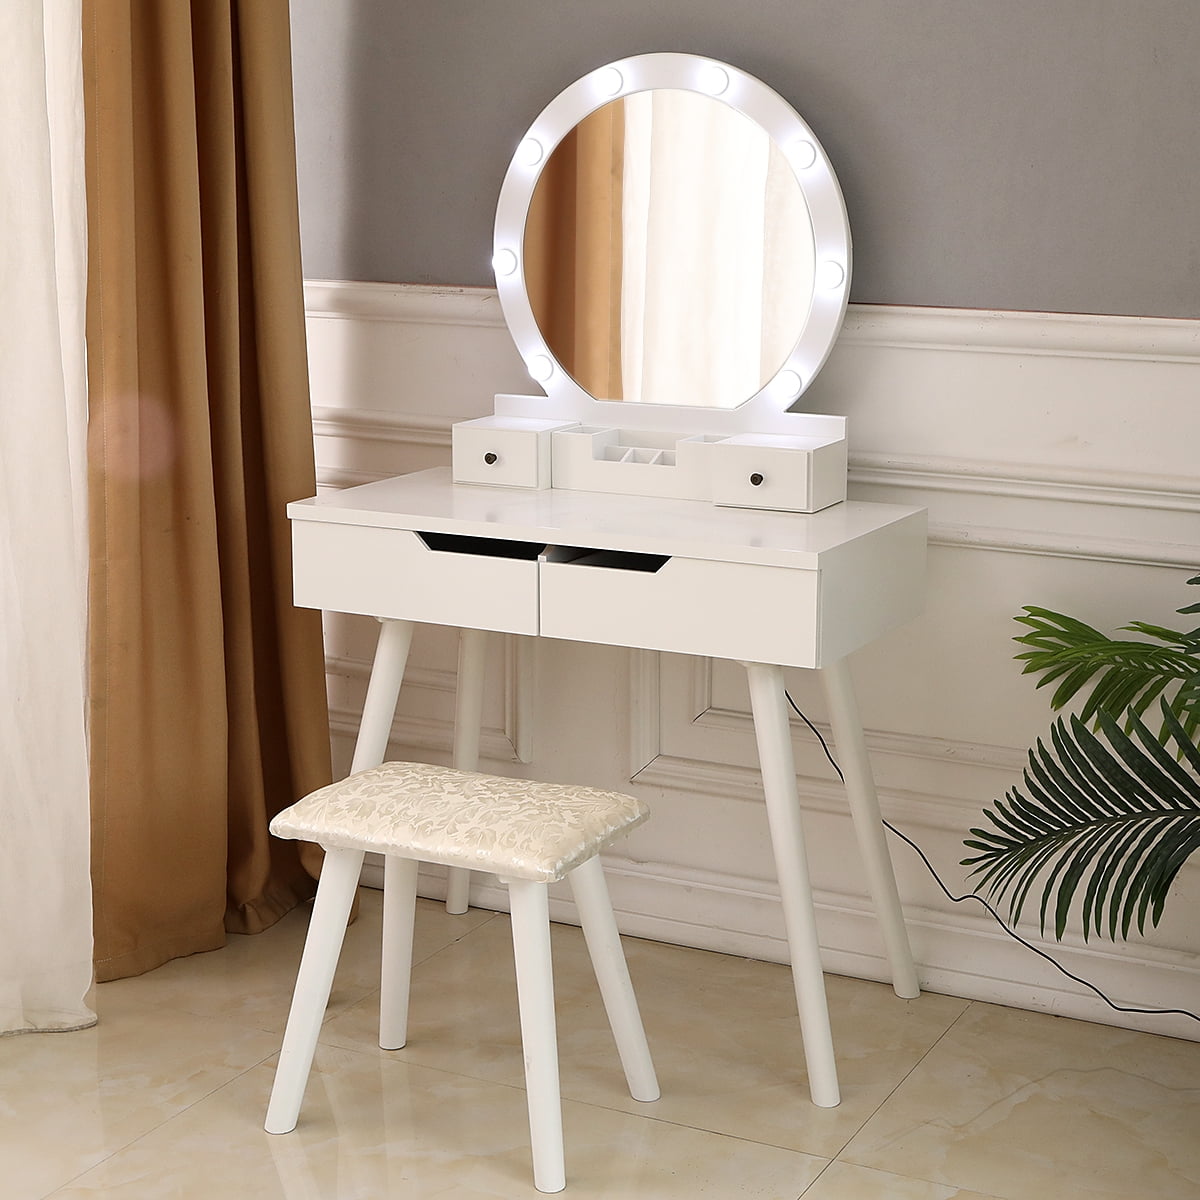 Details about   Vanity Set Makeup Table With Cushioned Stool Storage Shelves Makeup Organizer 